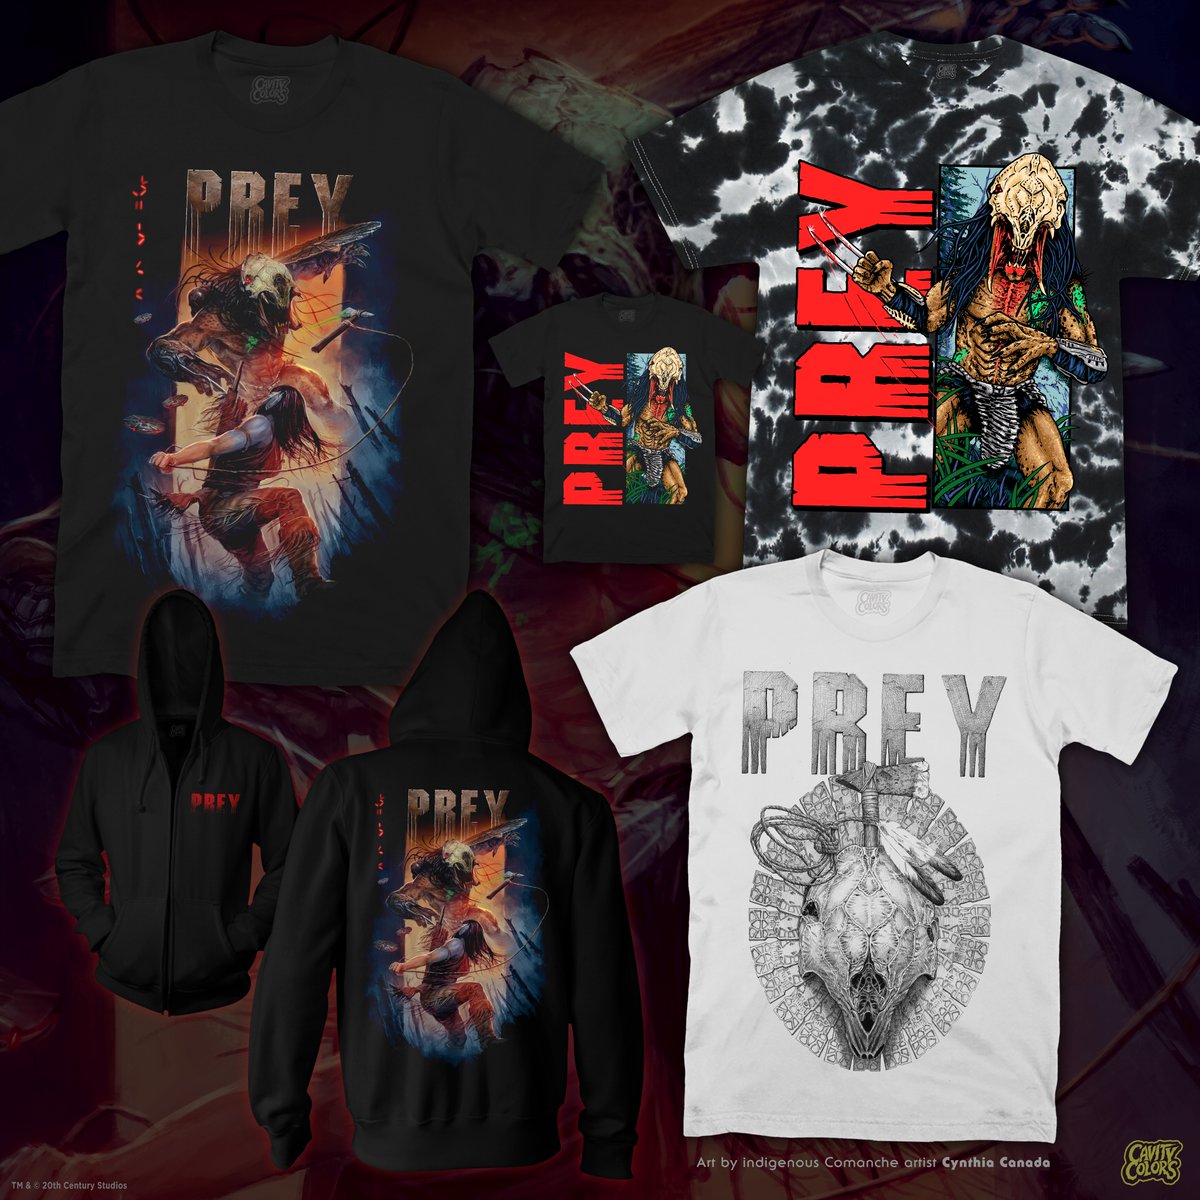 YES! Massive congrats to @DannyTRS @AmberMidthunder and cast + crew on the massive Emmy nominations! 🎉 So well deserved. PREY was one of our all time favorite films in the entire Predator franchise, and it was an honor to work on the official shirts for this KILLER film!